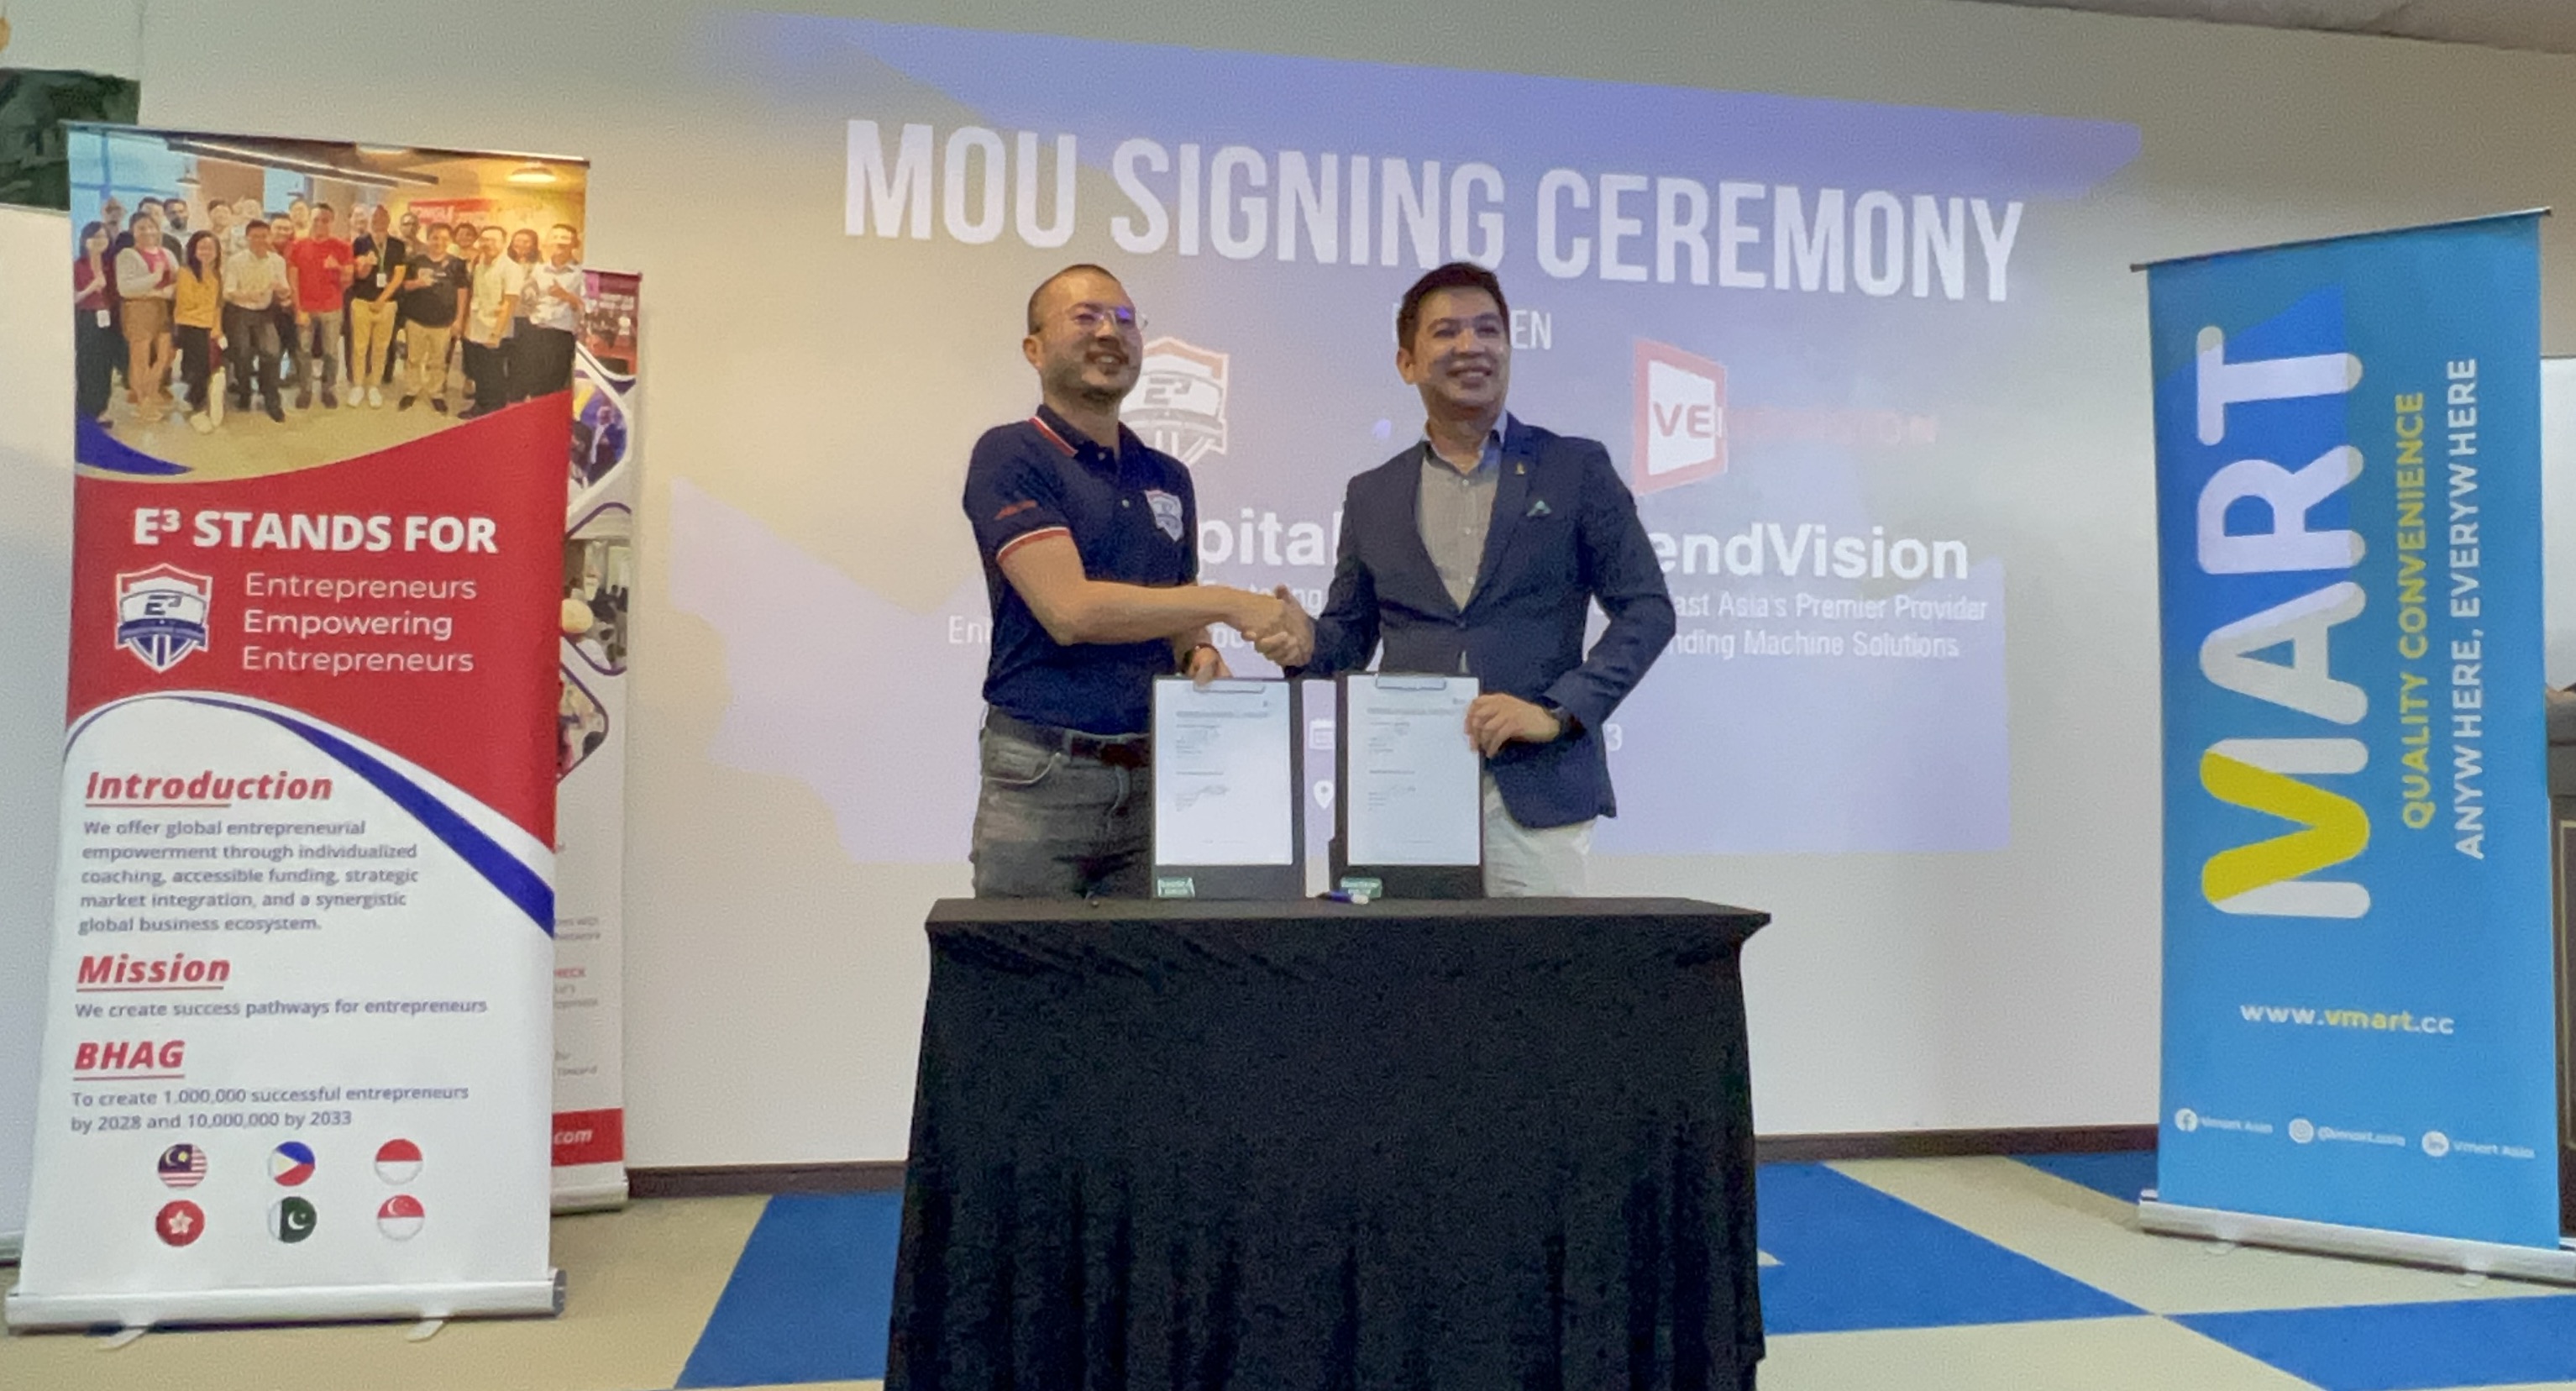 Calvin Quah, Co-Founder of E3Capital Sdn Bhd, and Melvin Chan, Founder & CEO of Vendvision Resources Sdn Bhd during the MoU signing ceremony, in TusStar Malaysia Headquarters, Petaling Jaya, Selangor.<br>